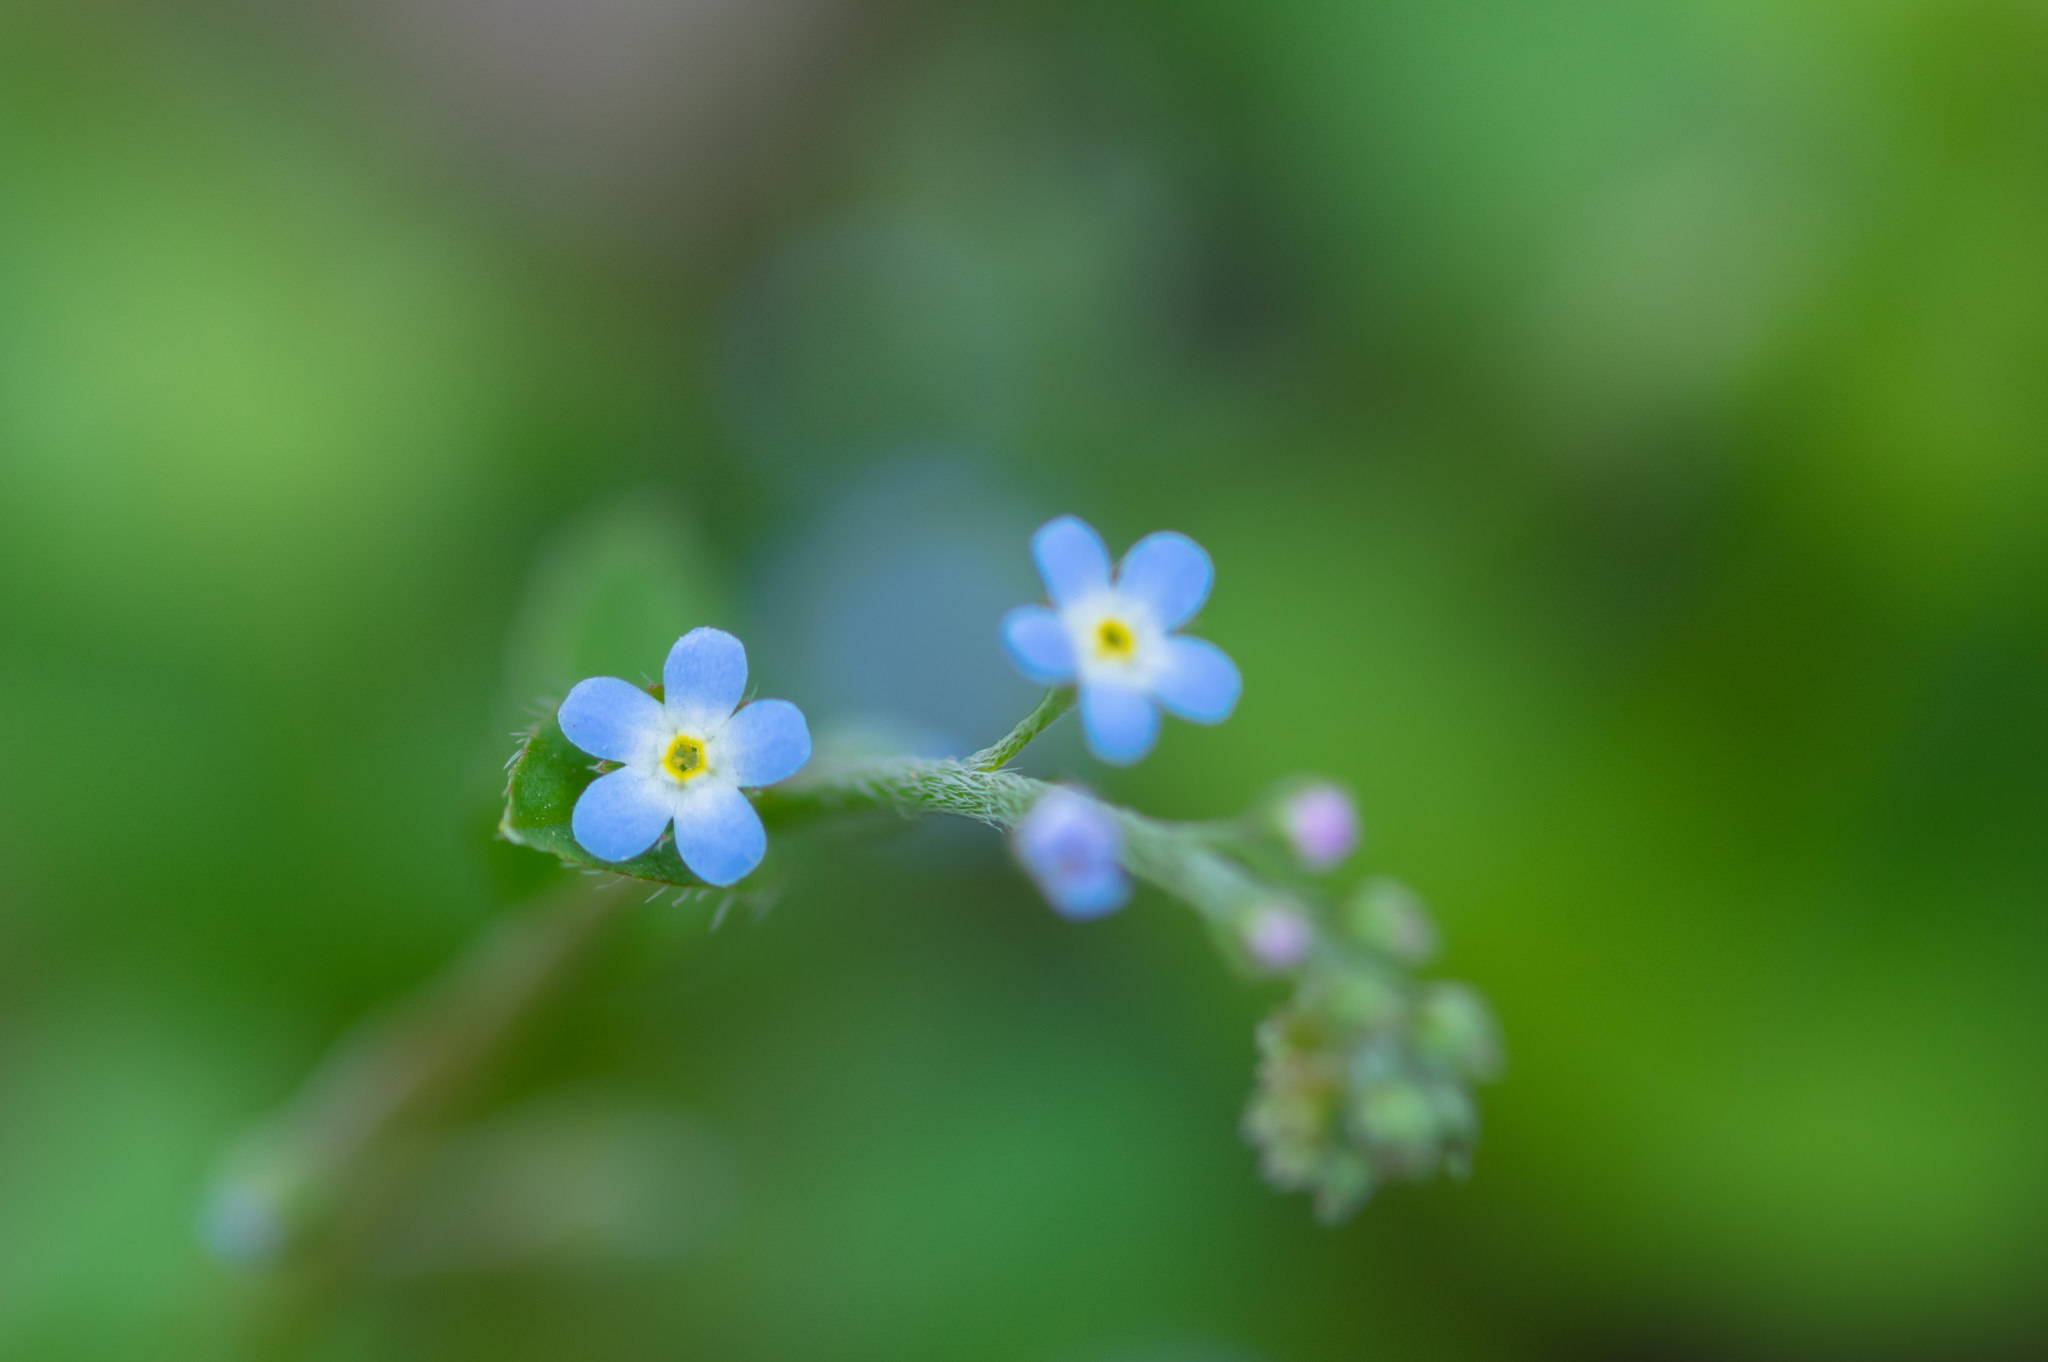 General 2048x1362 flowers nature macro forget-me-nots closeup blurry background blurred depth of field